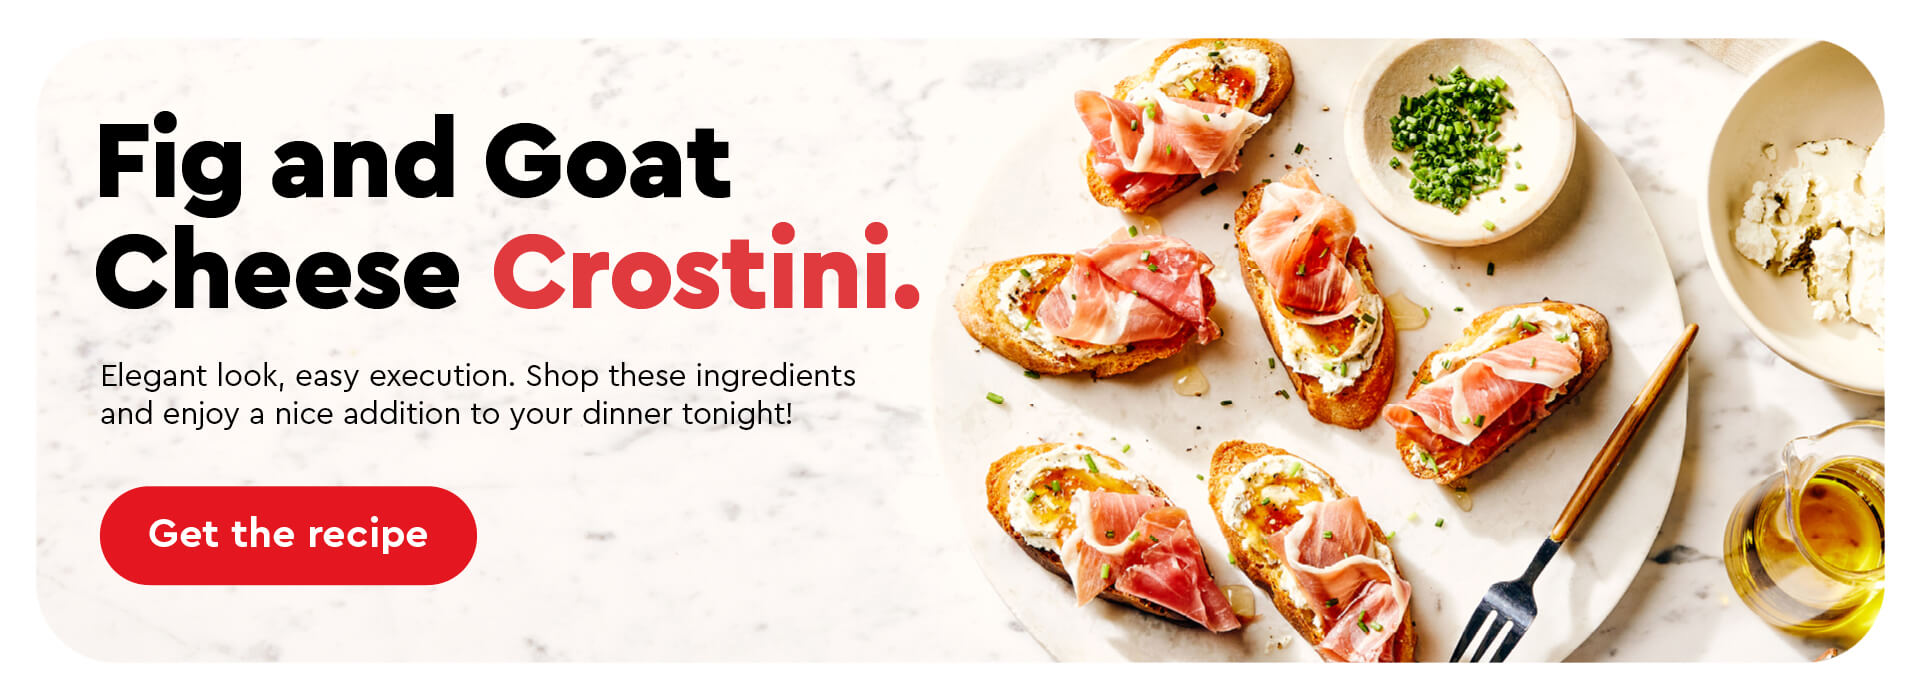 Text Reading 'Make Fig and Goat Cheese Crostini tonight. Elegant look, easy execution. Shop these ingredients and enjoy a nice addition to your dinner tonight! 'Get the recipe' from the button given below.'